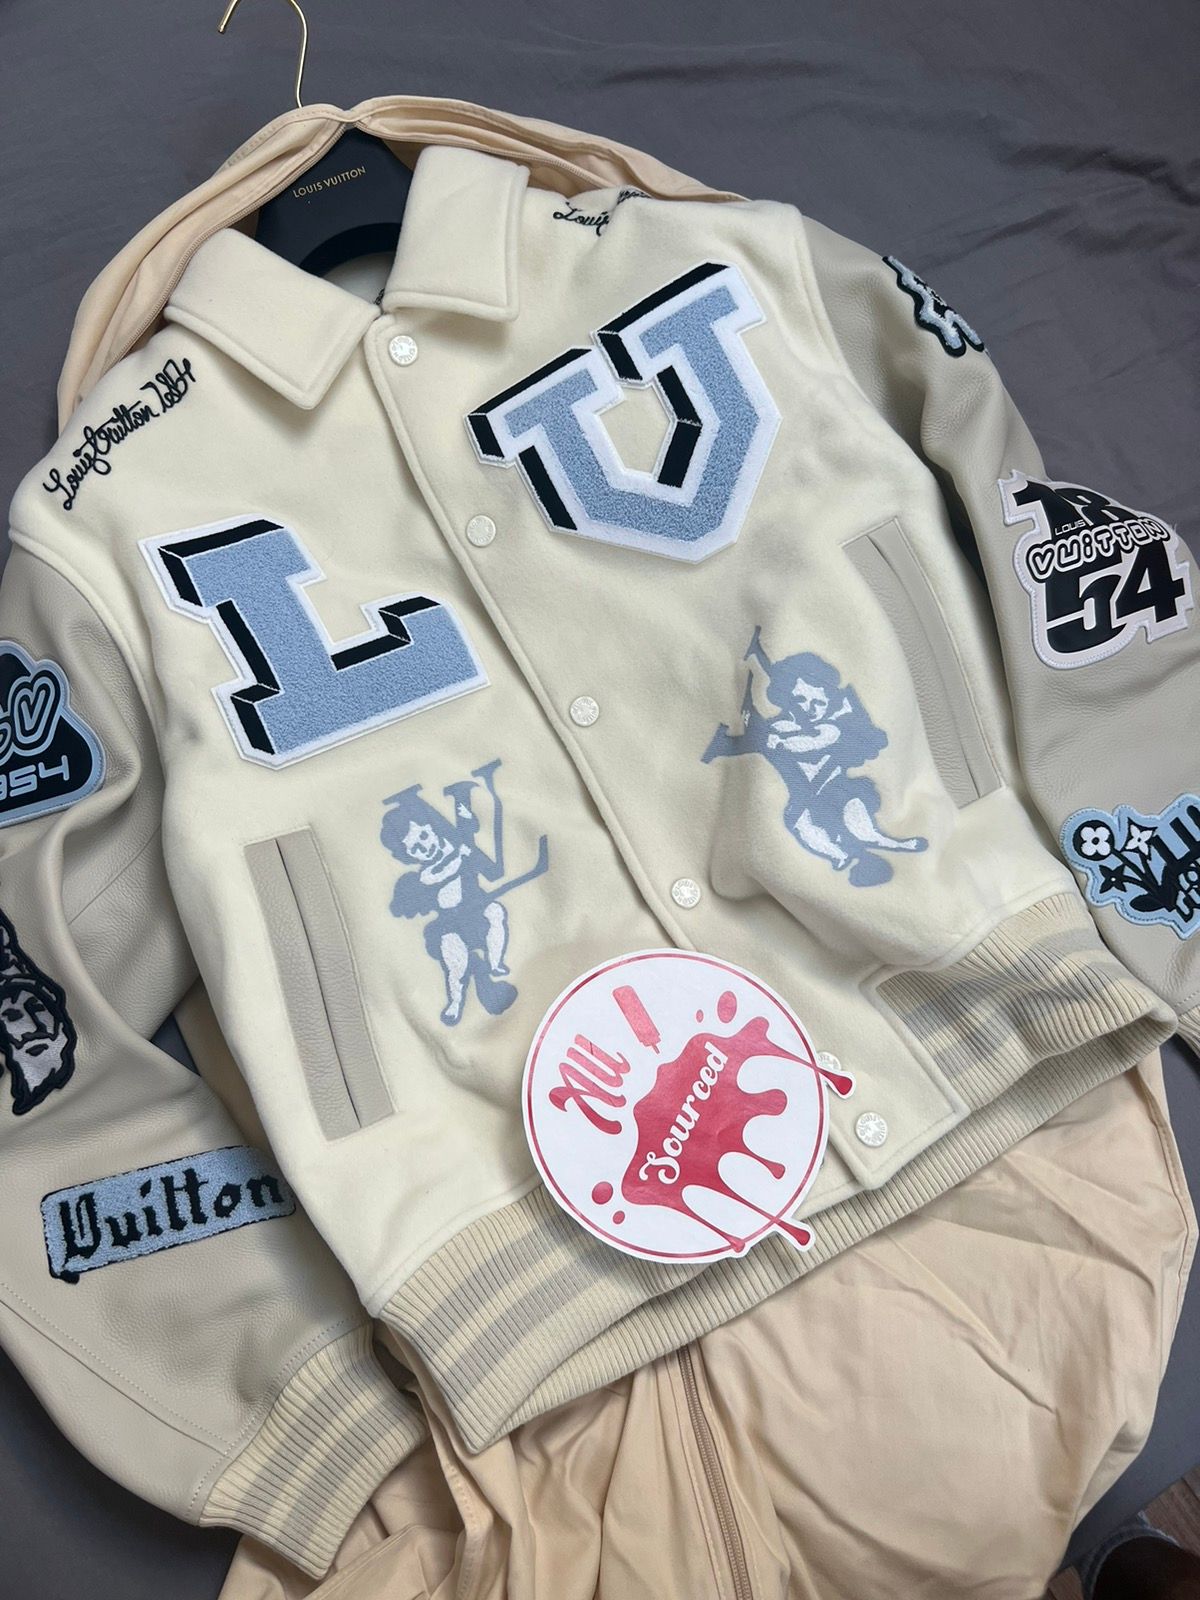 Louis Vuitton x Supreme Leather Monogram Bomber Jacket | Size 48, Apparel in Red/White